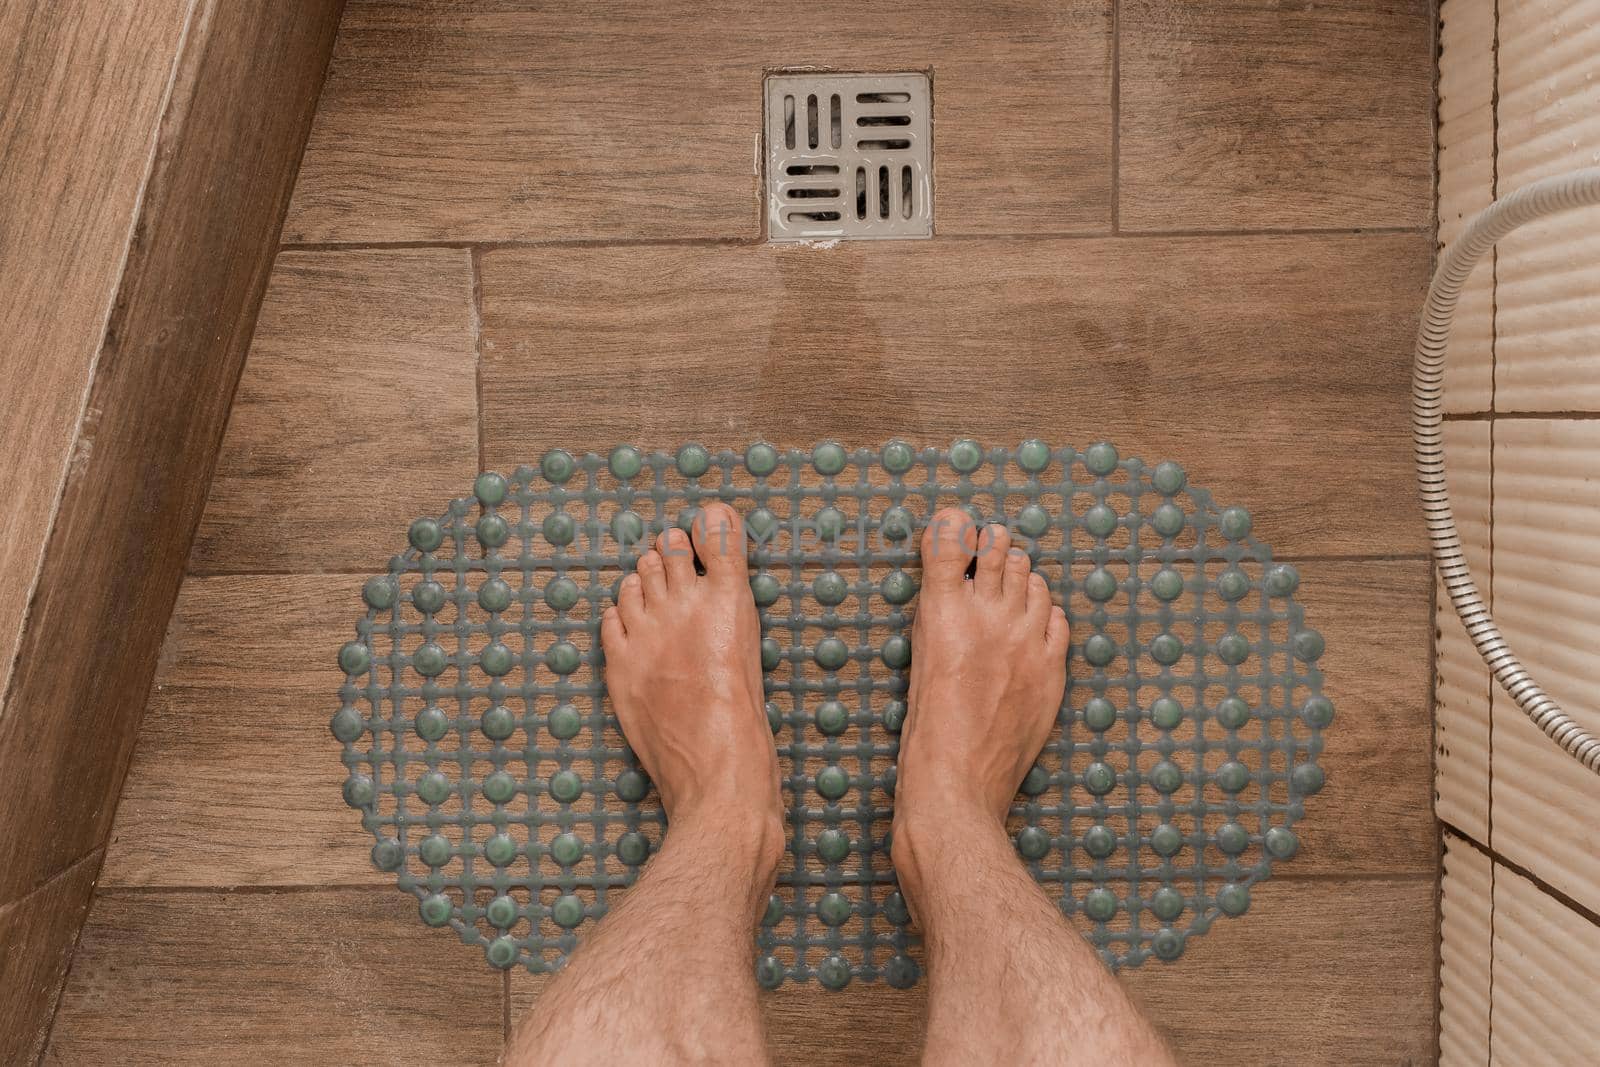 Men's feet stand on a plastic anti-slip mat next to the floor drain in the bathroom or shower.